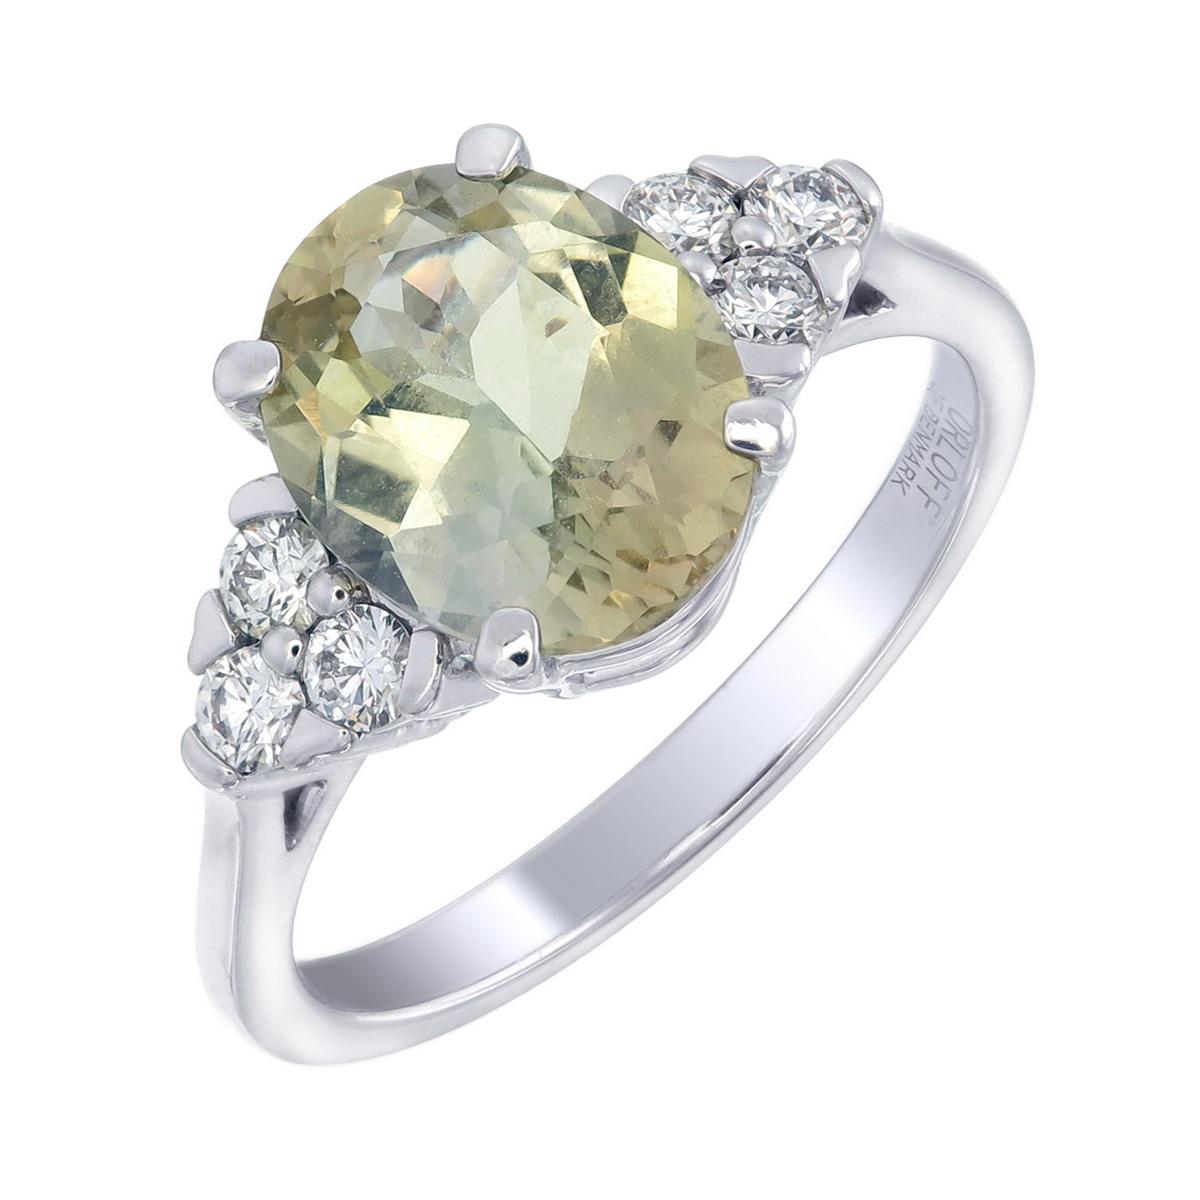 Orloff of Denmark's own; 
Captivate onlookers with the unique allure of this 2.83 carat Yellowish-Green Zoisite Diamond Ring. Set in the pristine elegance of 18 Karat white gold, this ring features a magnificent zoisite gemstone at its heart,